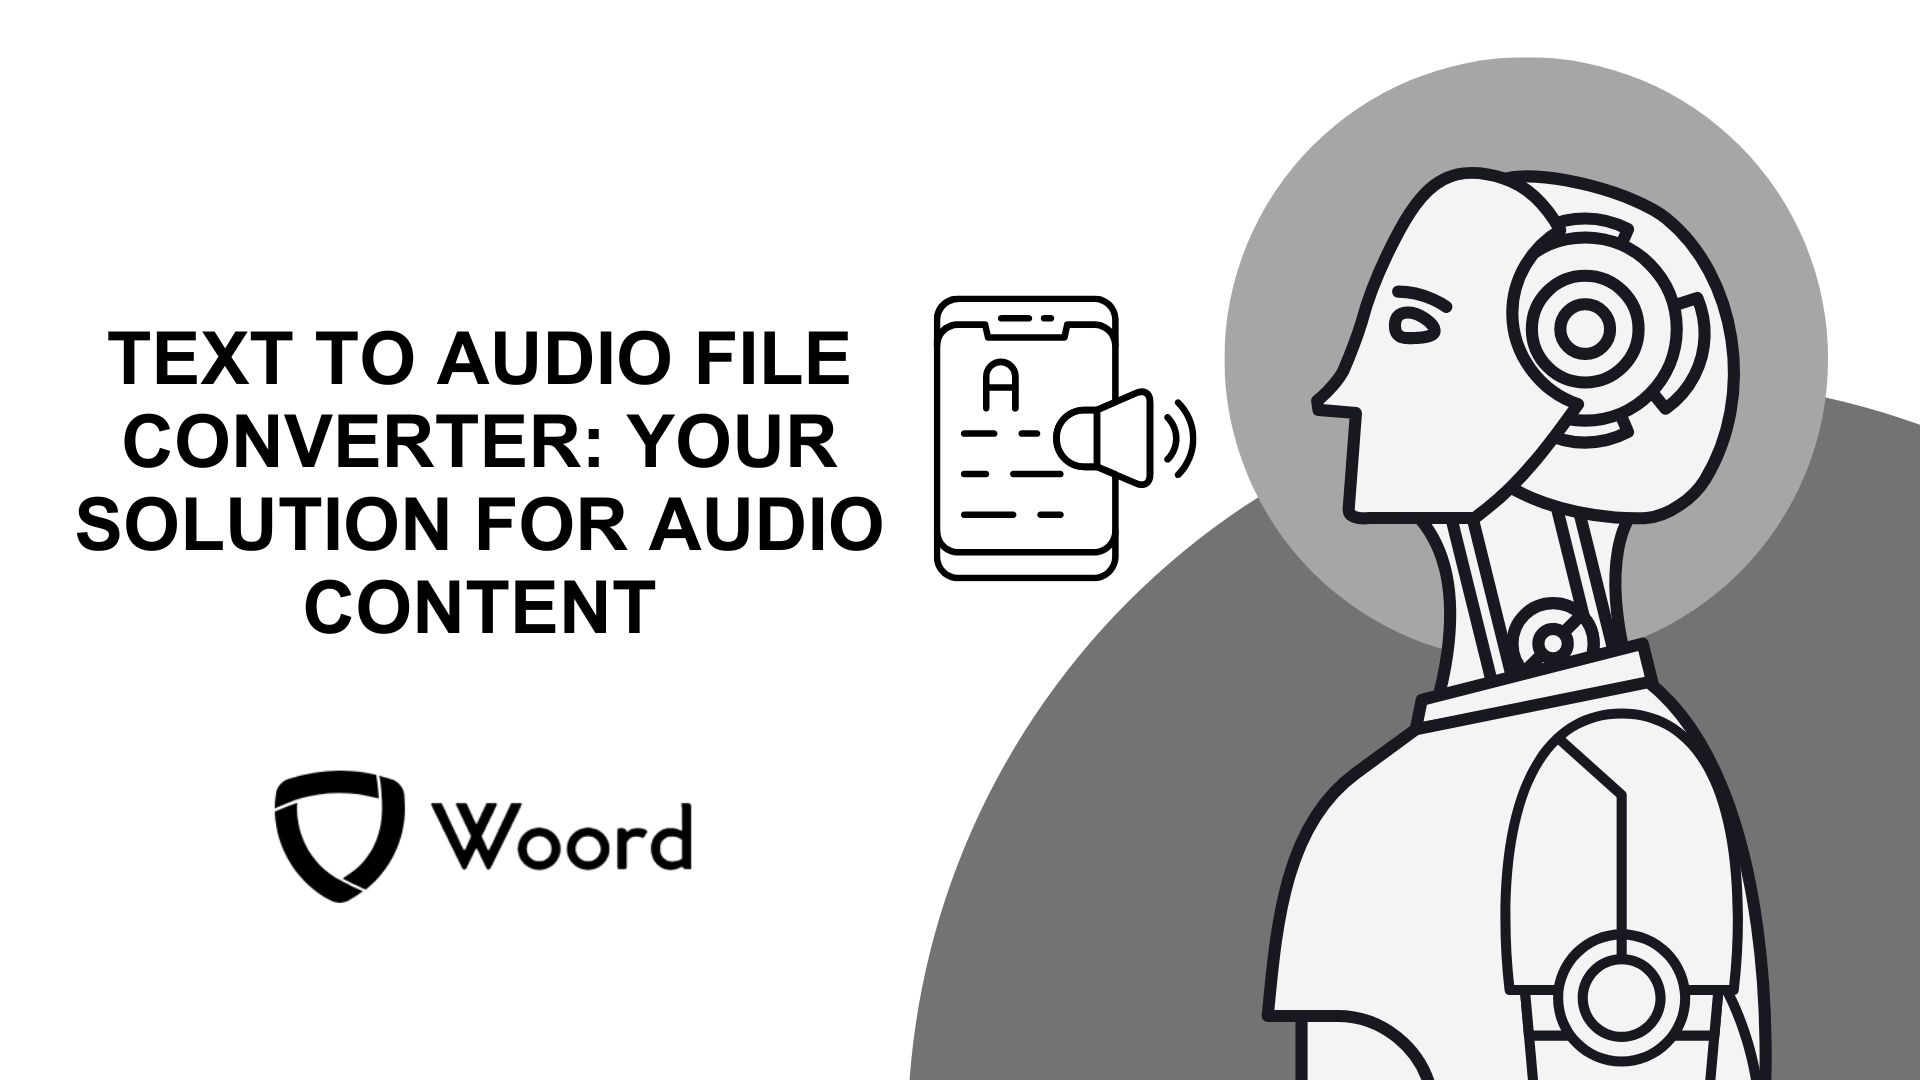 Text To Audio File Converter: Your Solution For Audio Content